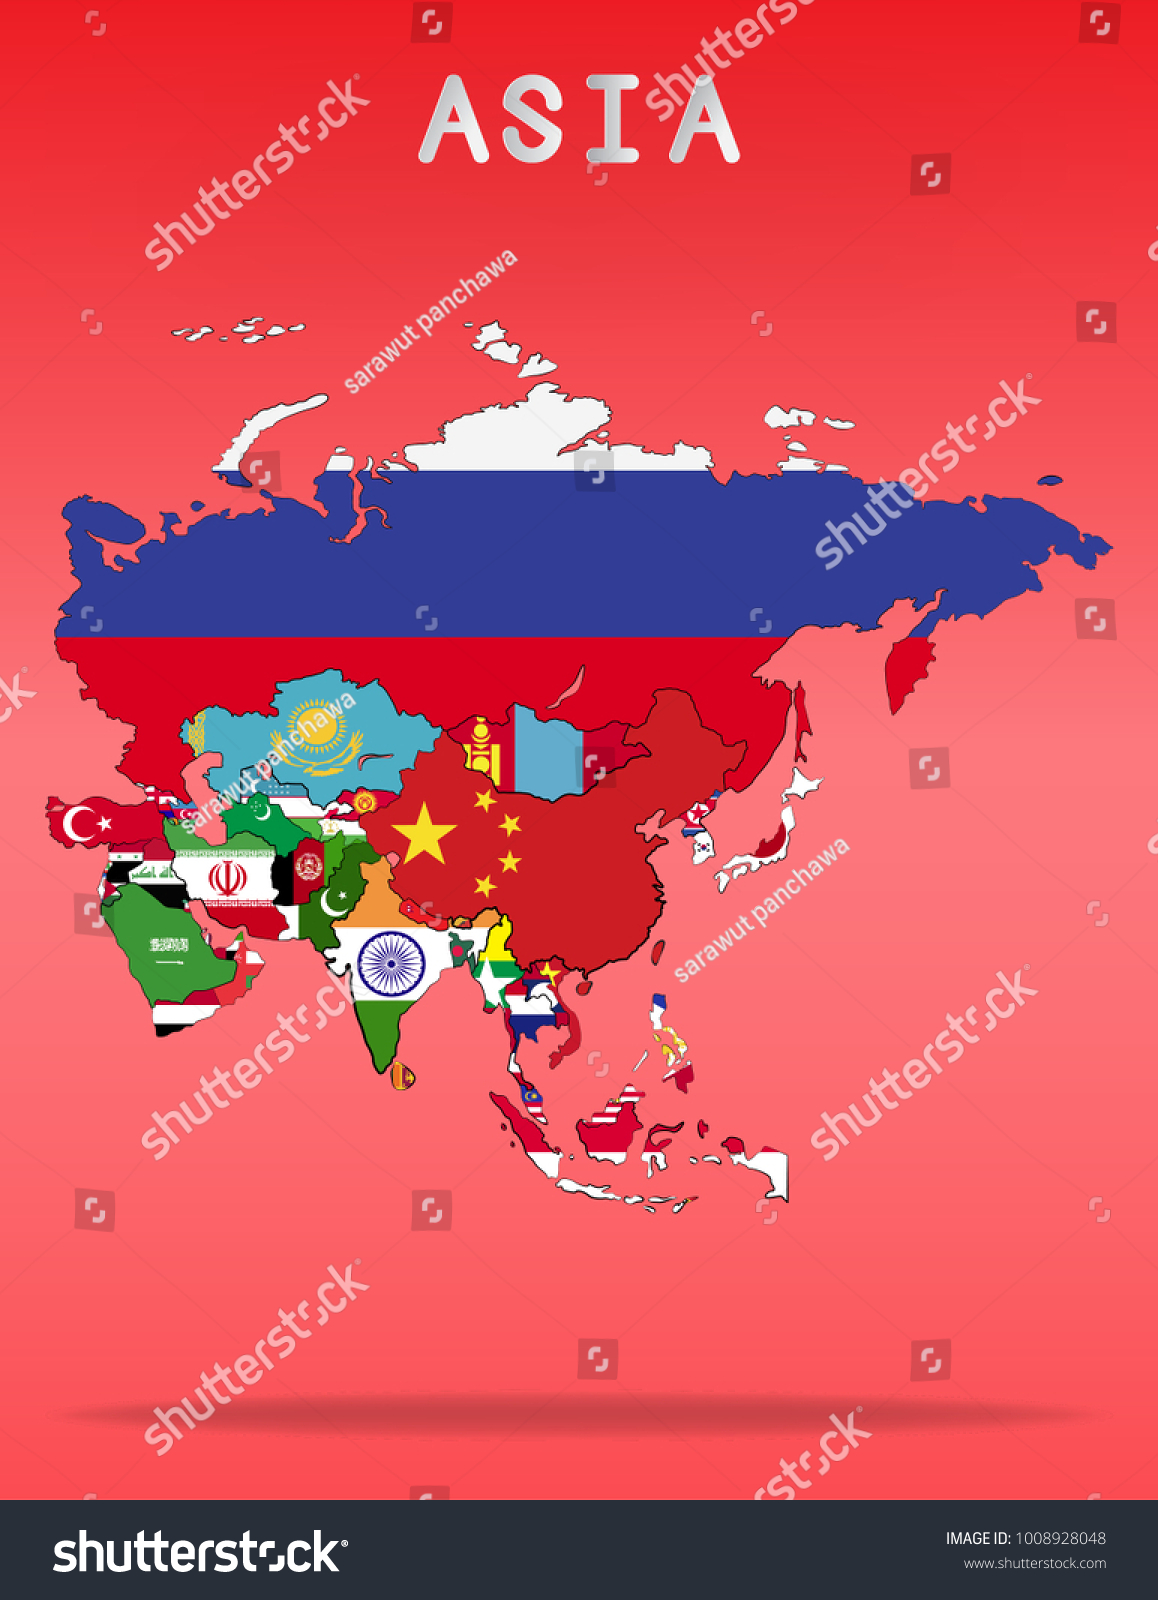 stock-vector-asia-continent-and-russia-map-with-flag-and-country-line-vector-eps-1008928048.jpg